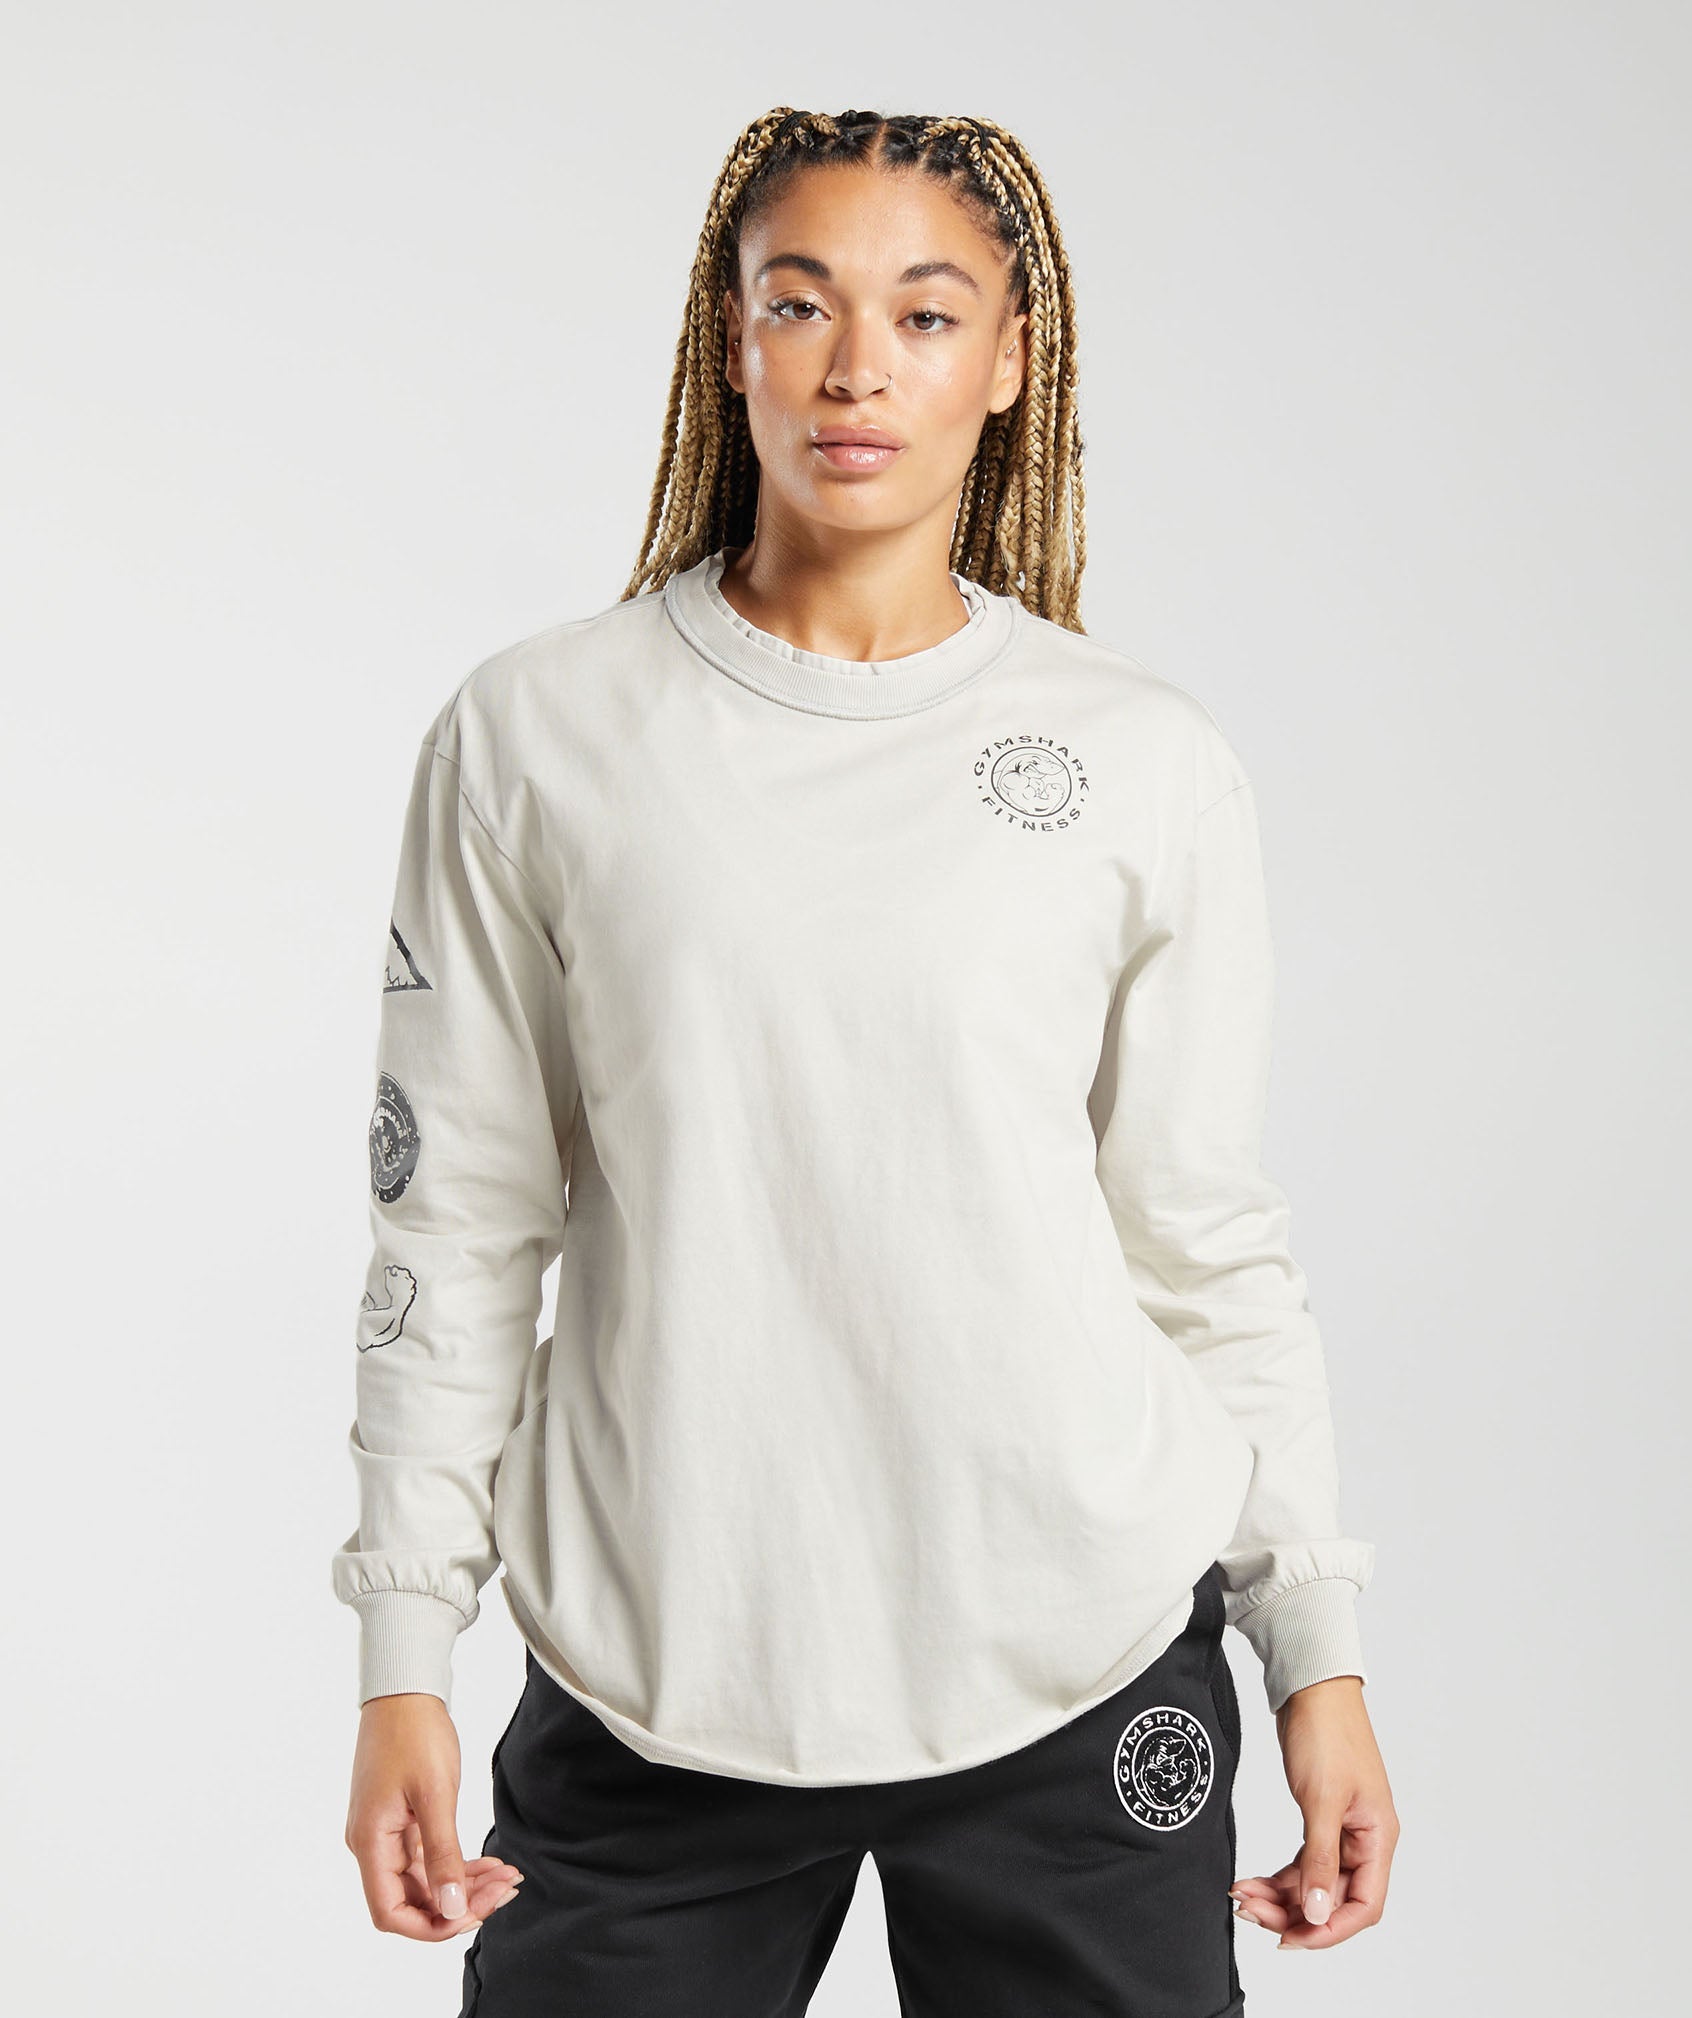 Legacy Washed Long Sleeve Top in Metal Grey/Acid Wash - view 1